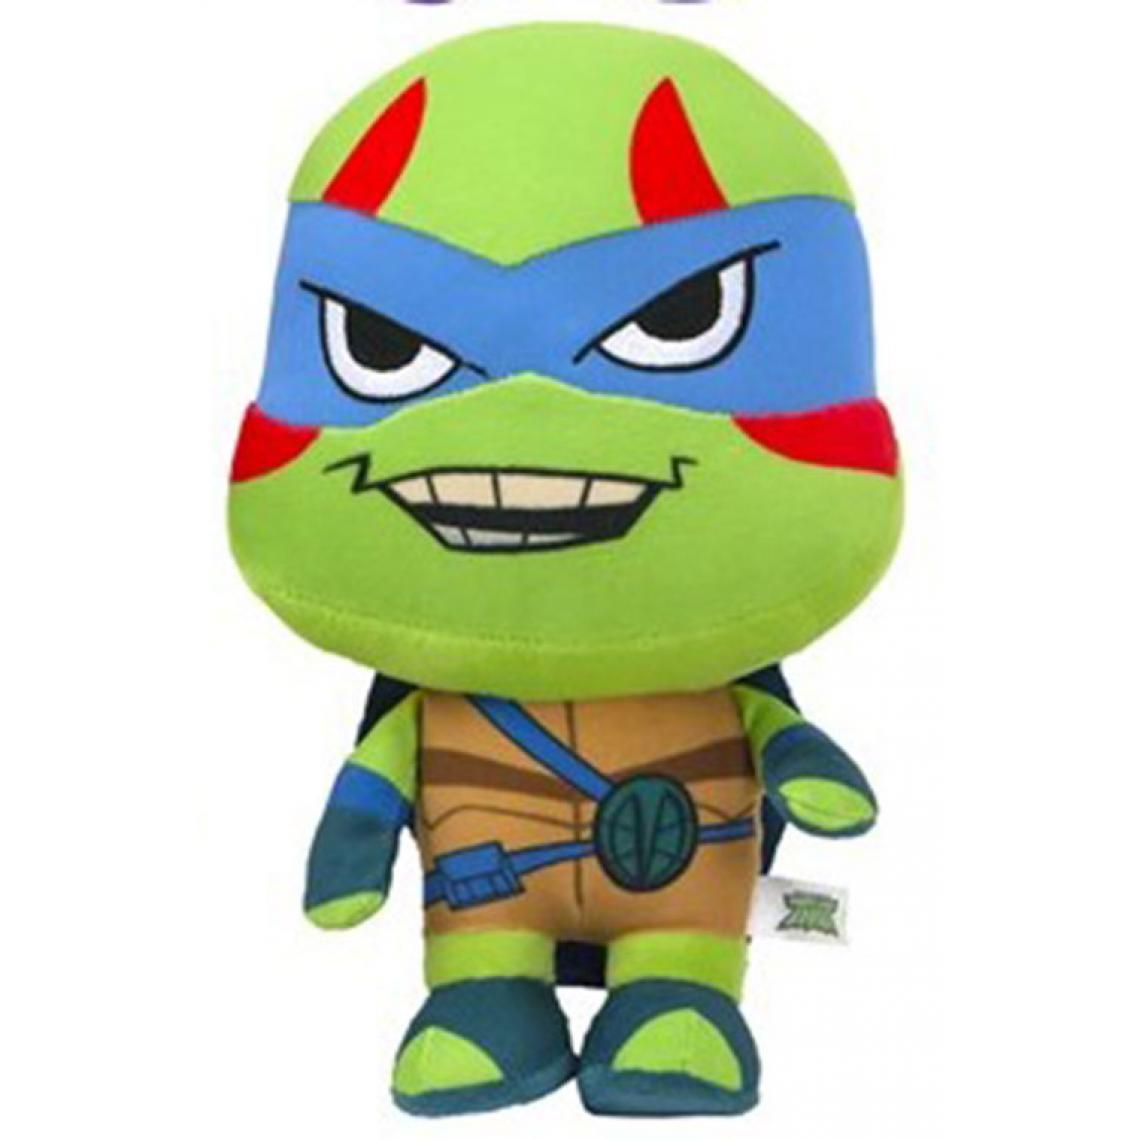 Play By Play - Peluche Tortue Ninja Mutante - 28 Cm - Héros et personnages